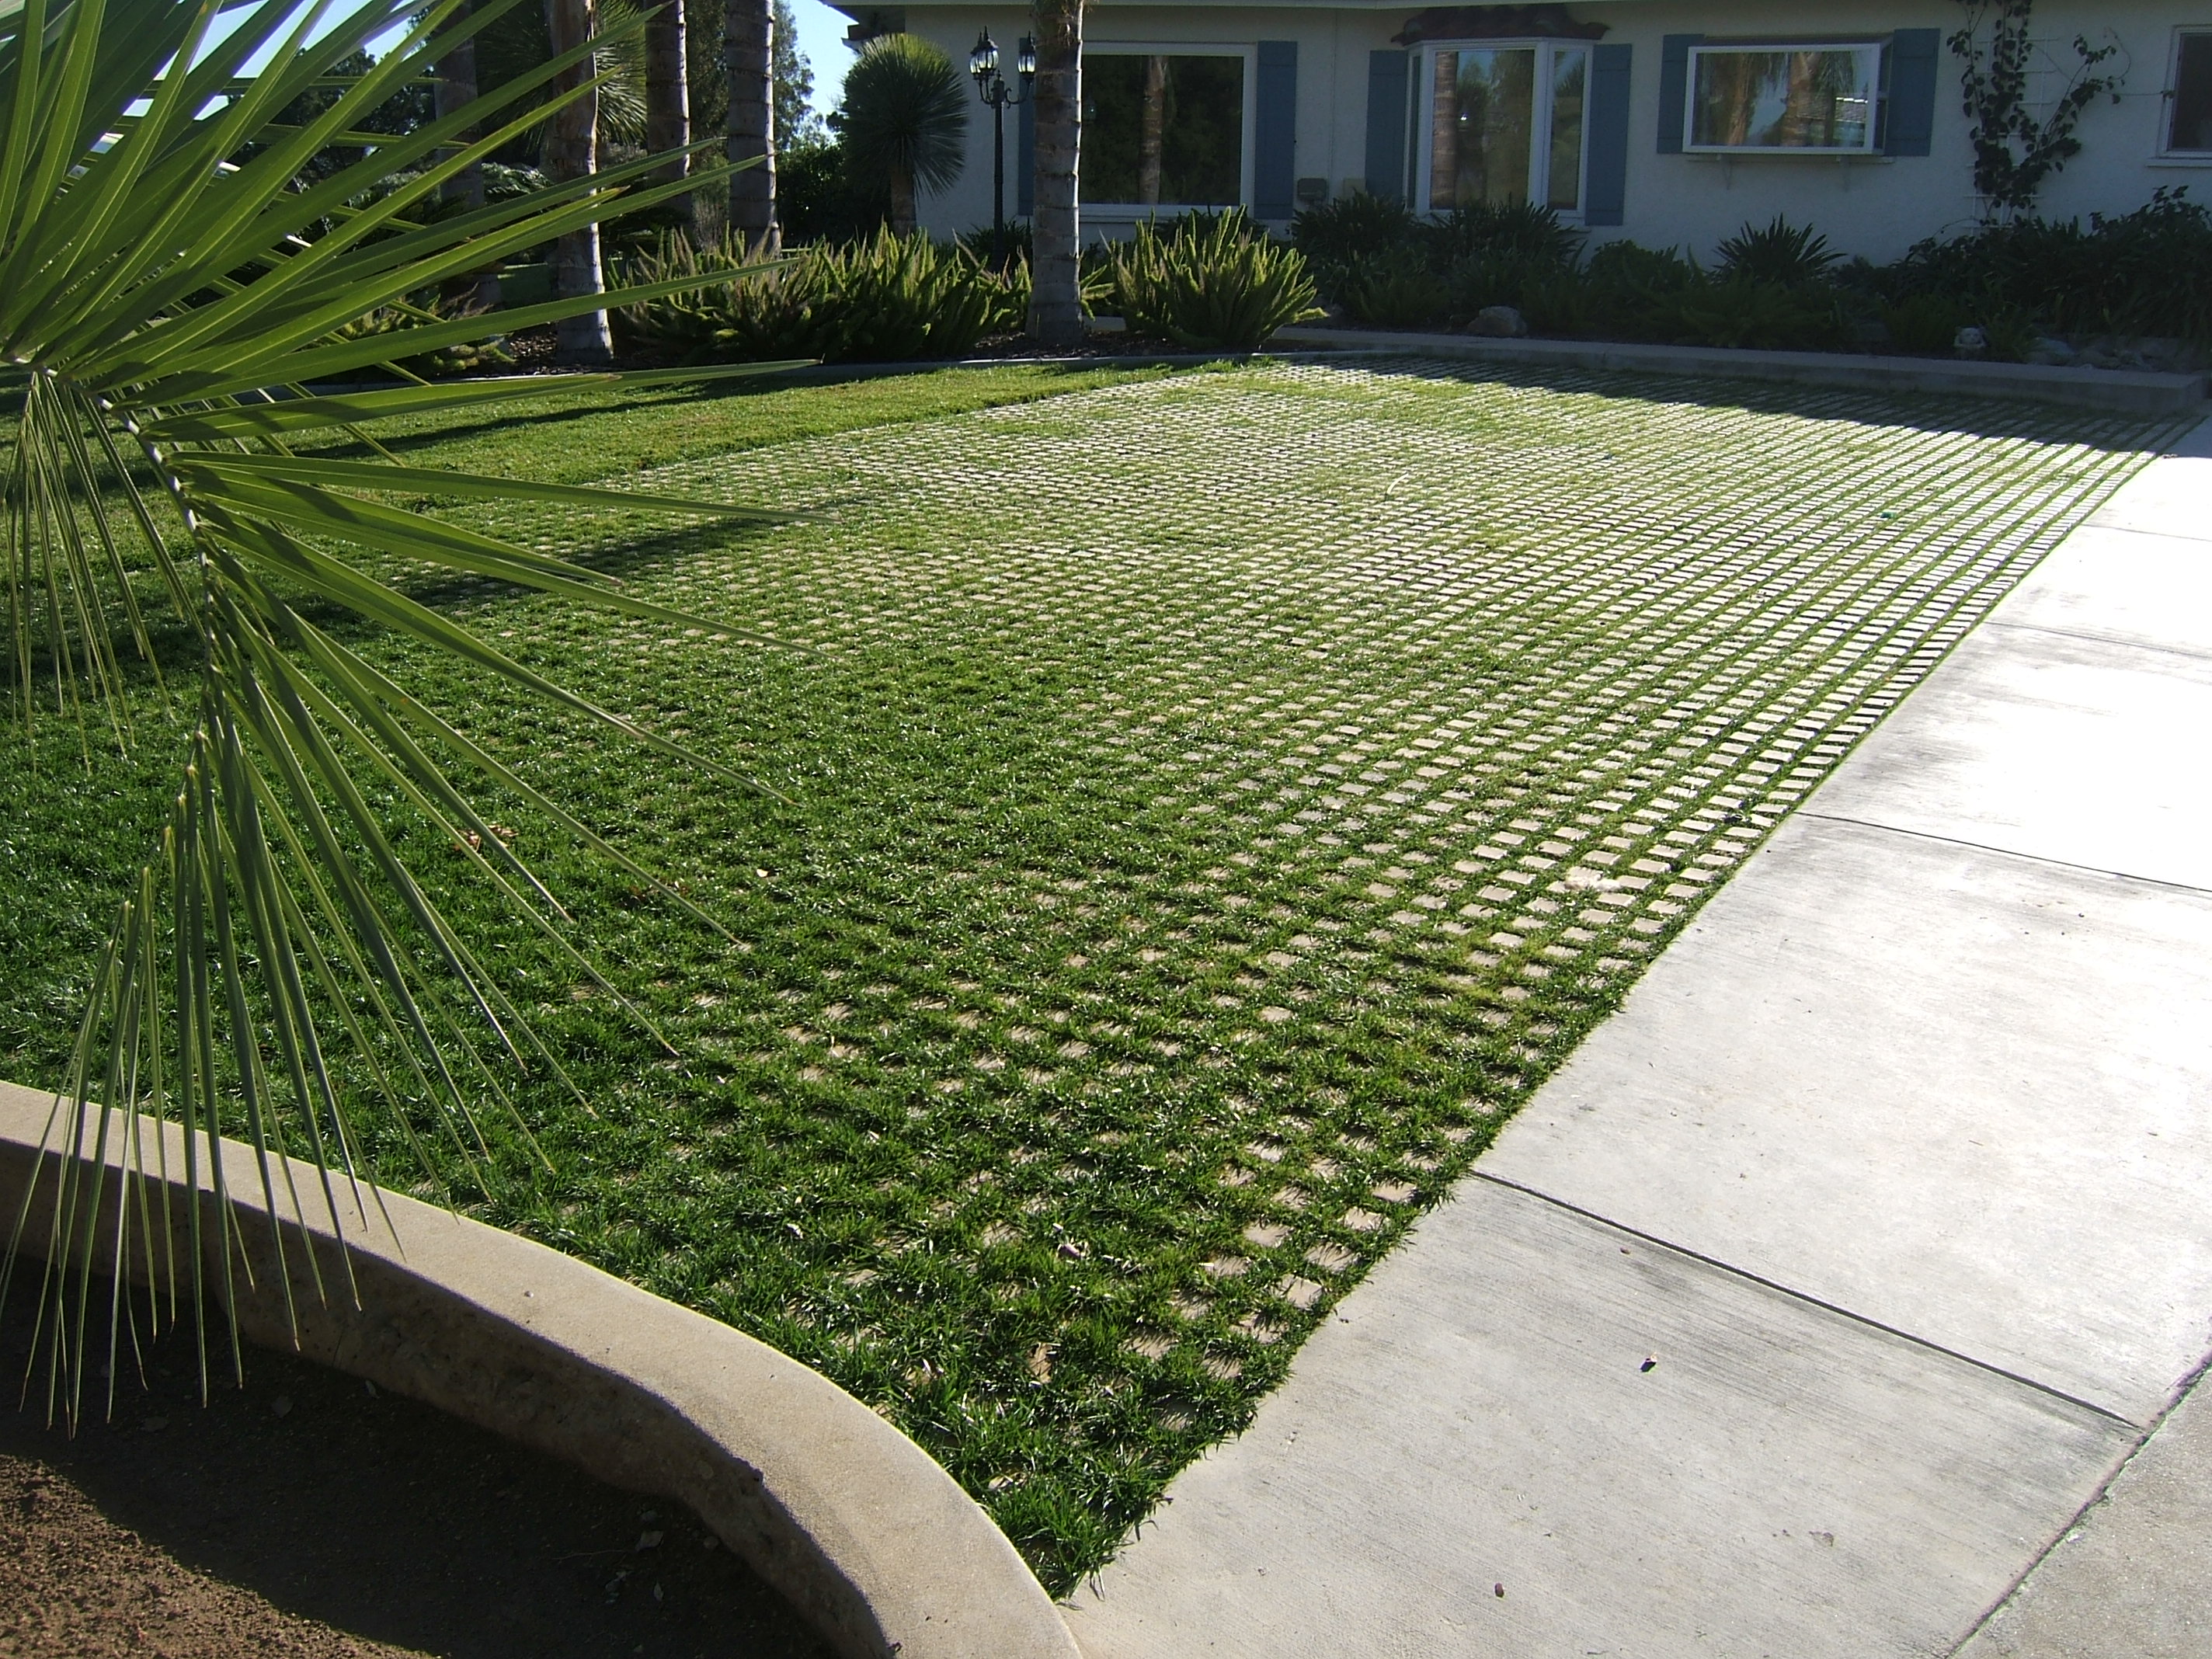 Drivable Grass pavers and sod for a green parking space.